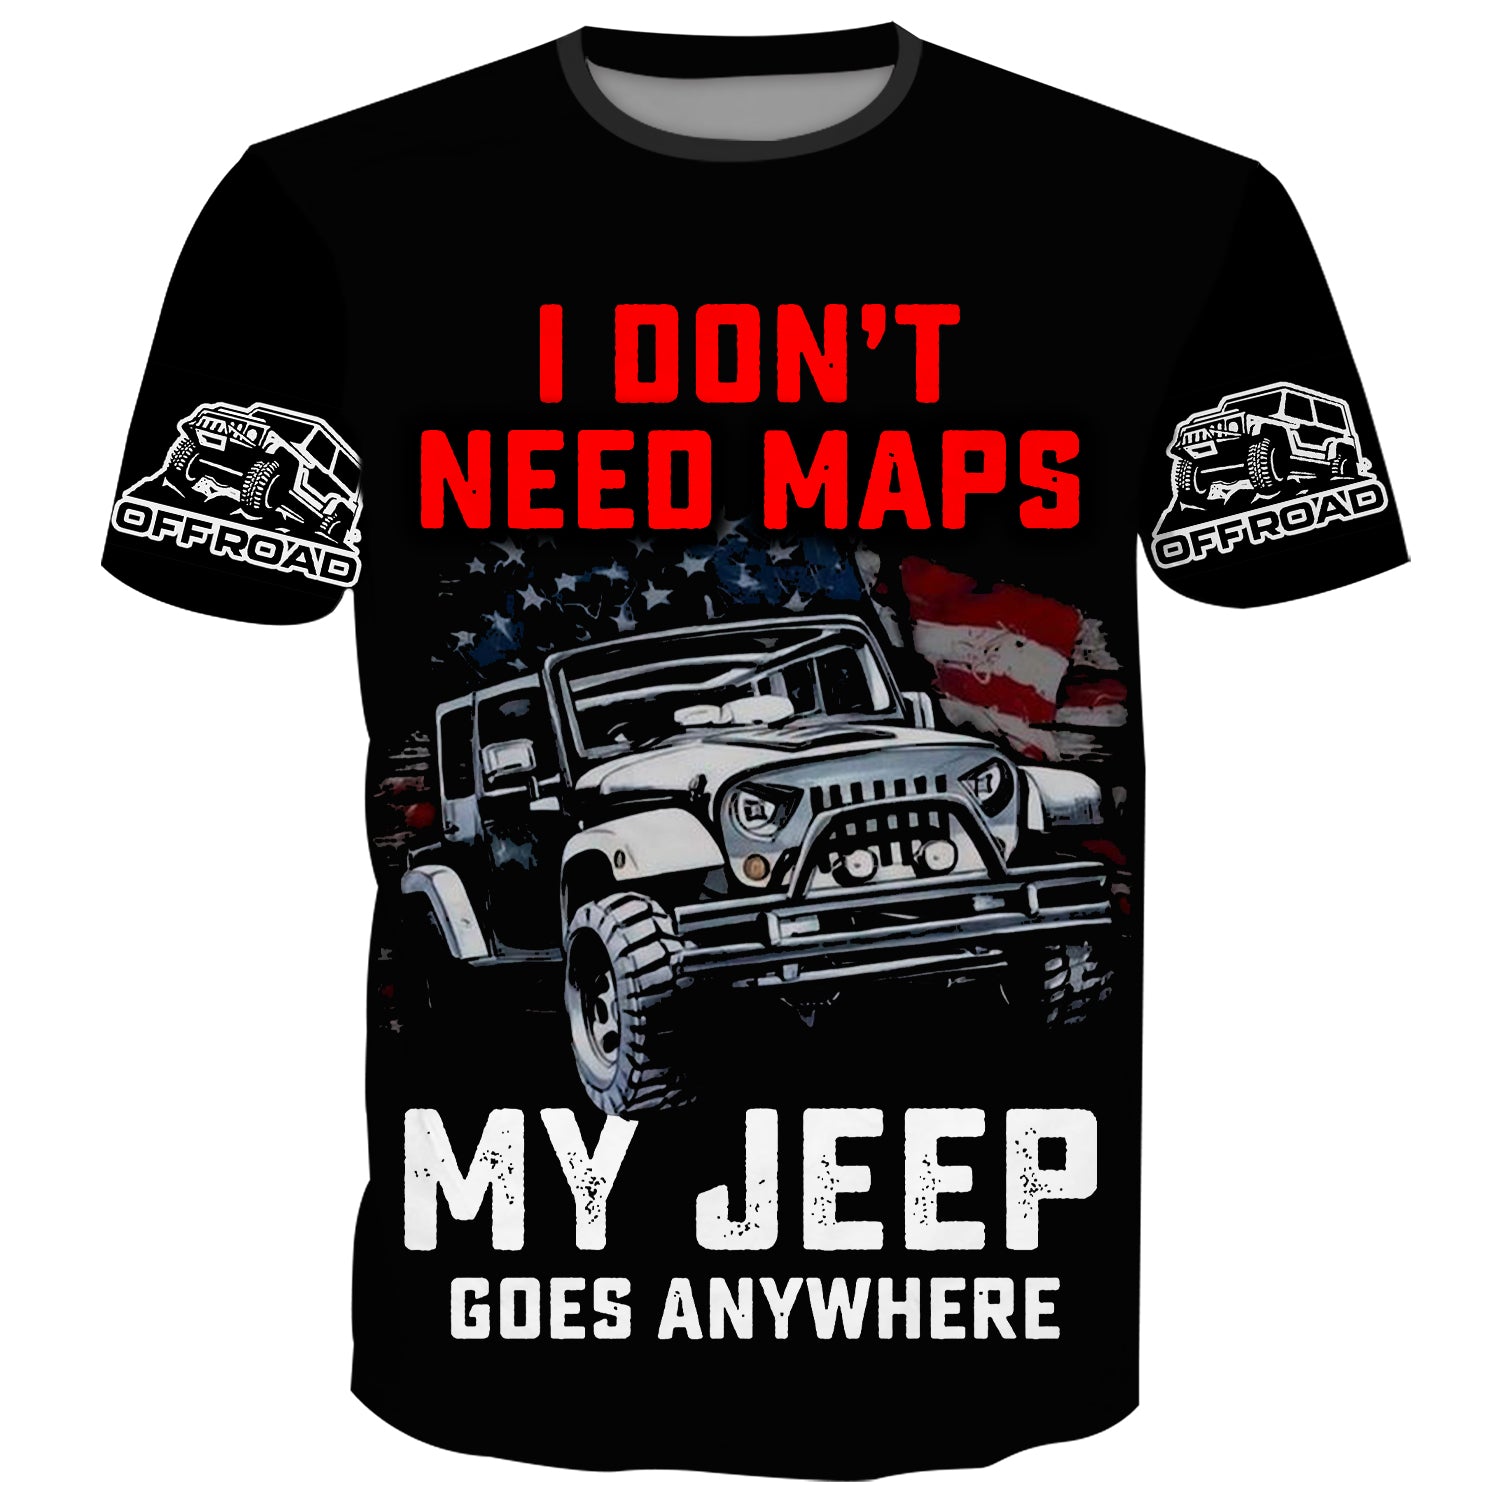 I don't need maps, my Jeep goes anywhere - T-Shirt